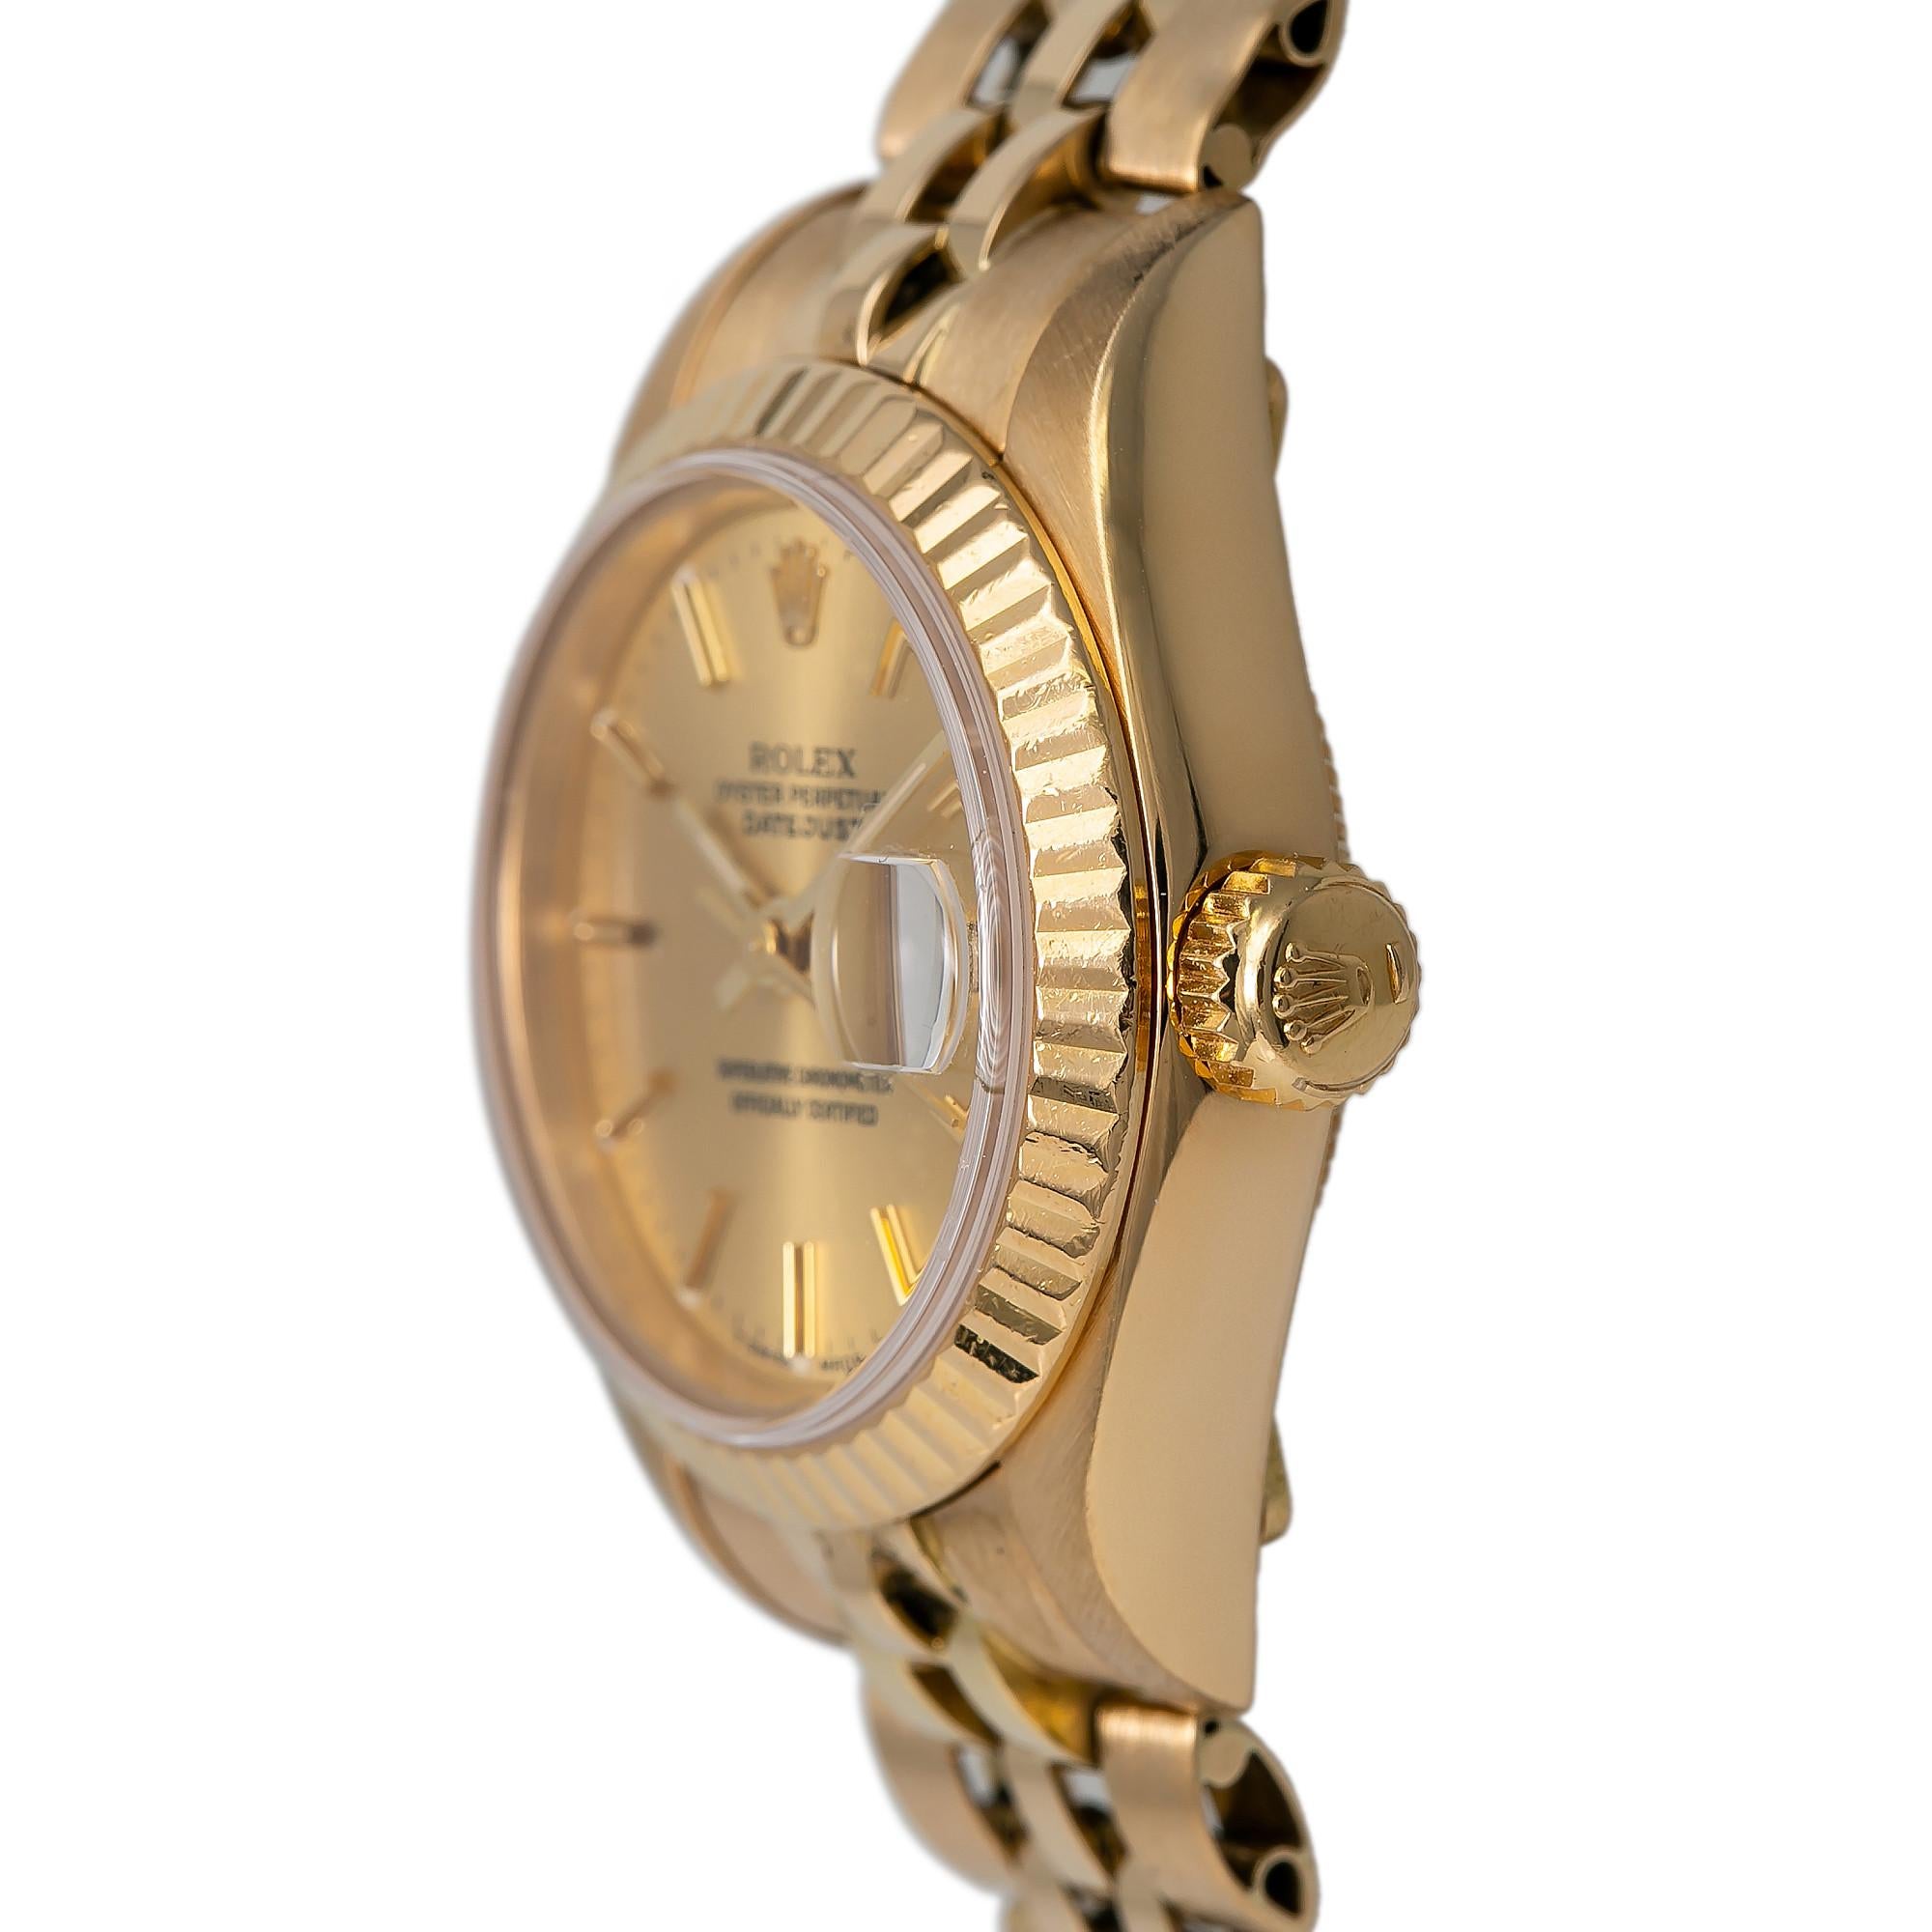 Modern Roles Datejust 69178 Automatic Watch 18 Karat Yellow Gold Jubilee Champagne Dial